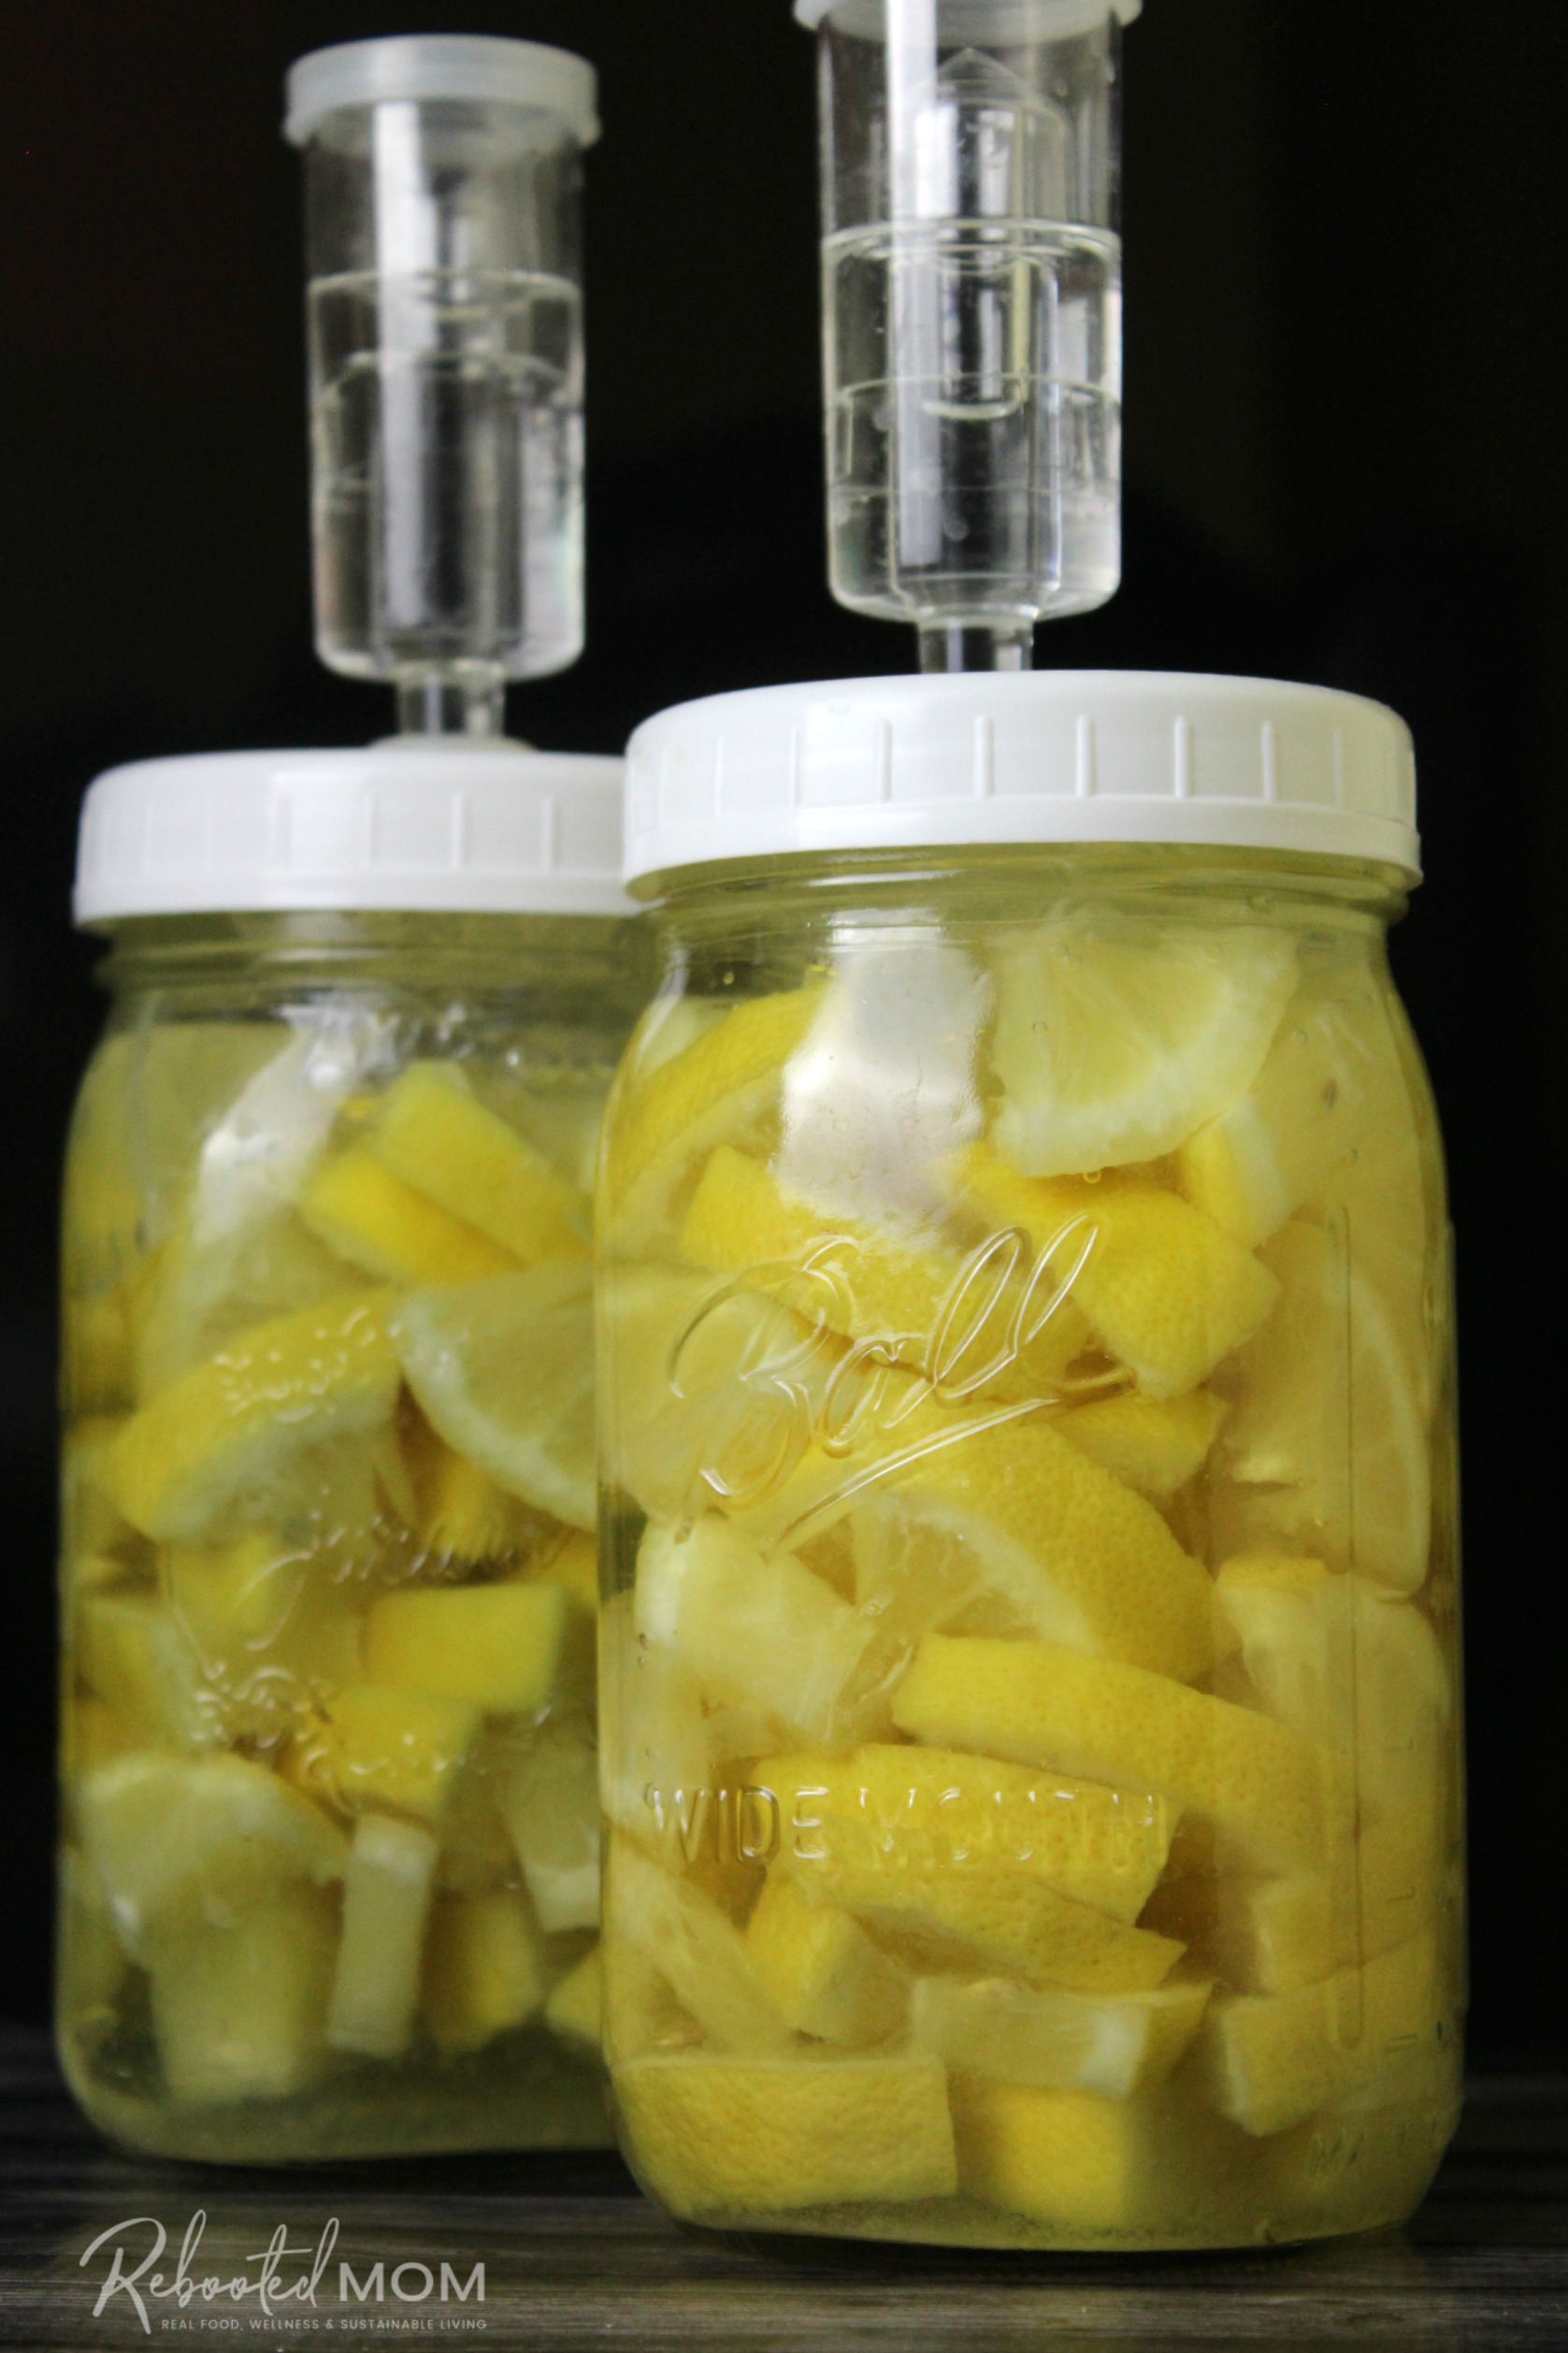 An amazing condiment, preserved lemons (fermented lemons) have added probiotics and are a wonderful addition to vegetable, pasta, meat and salad dishes.